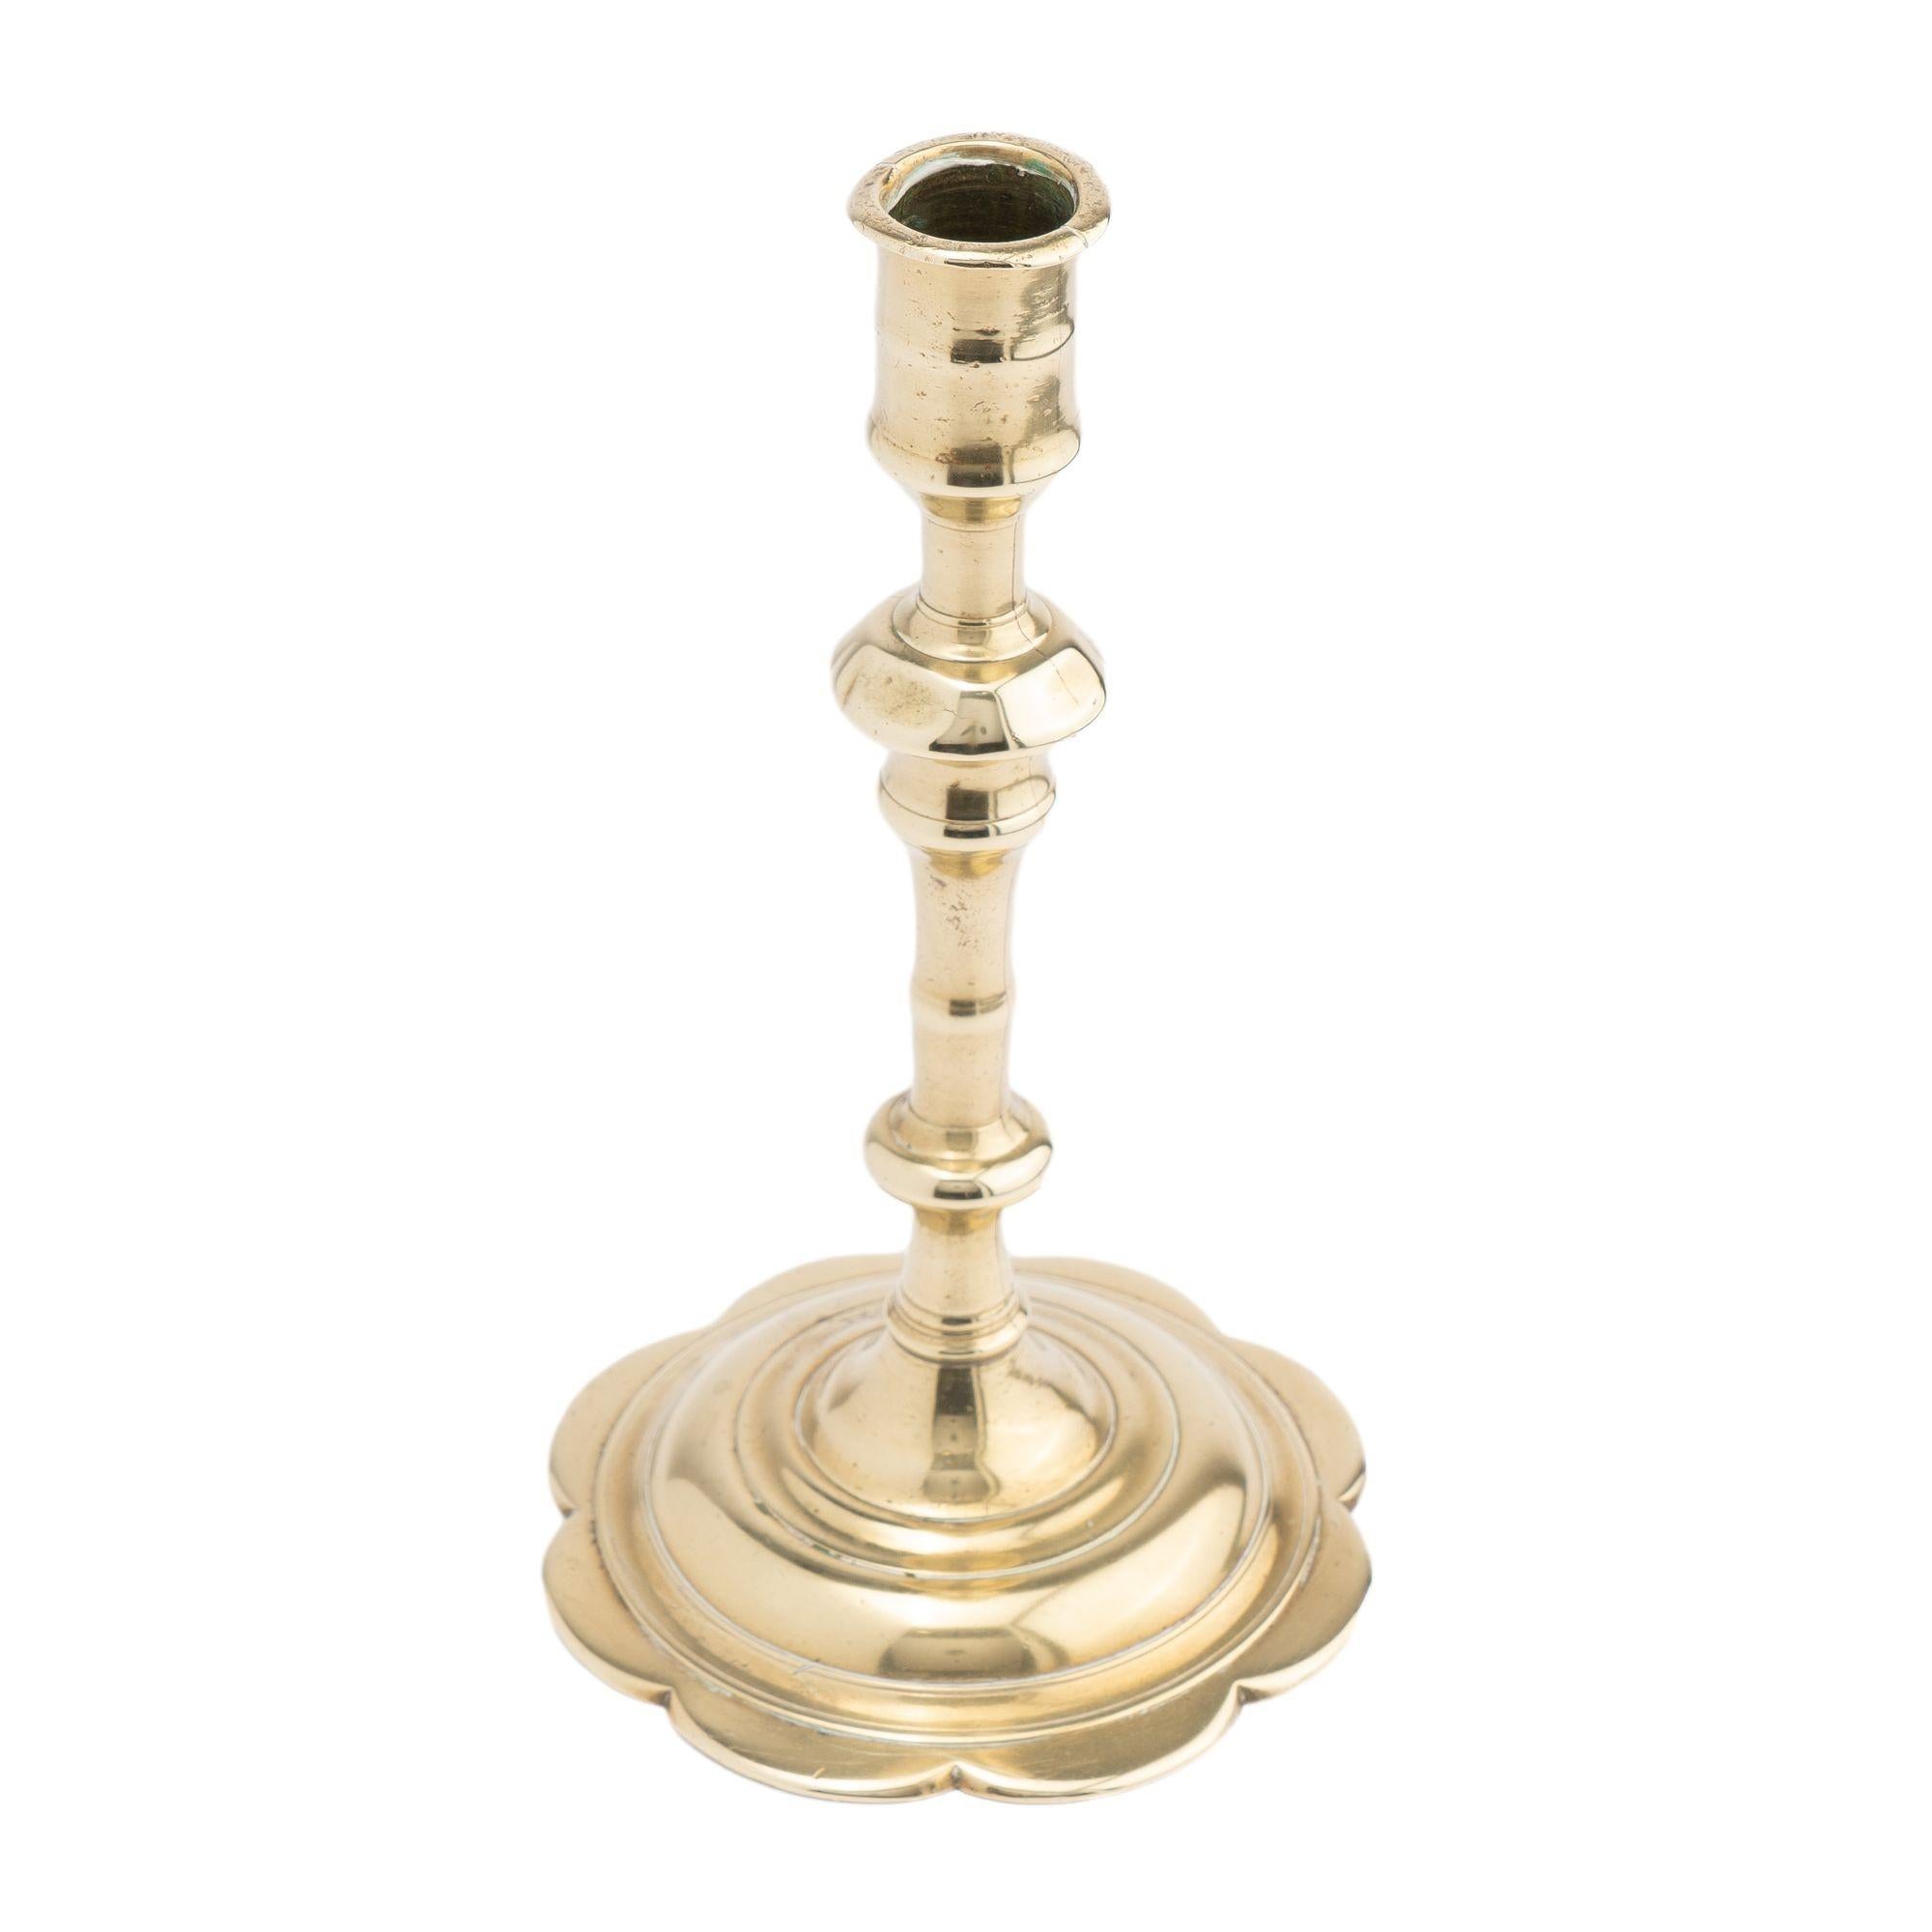 Seam cast brass Queen Anne candlestick with knobbed shaft & candle cup. The casting of the shaft is in two parts, silver soldered together and peened to a domed and scalloped edge base.

Birmingham, England, circa 1760-70.